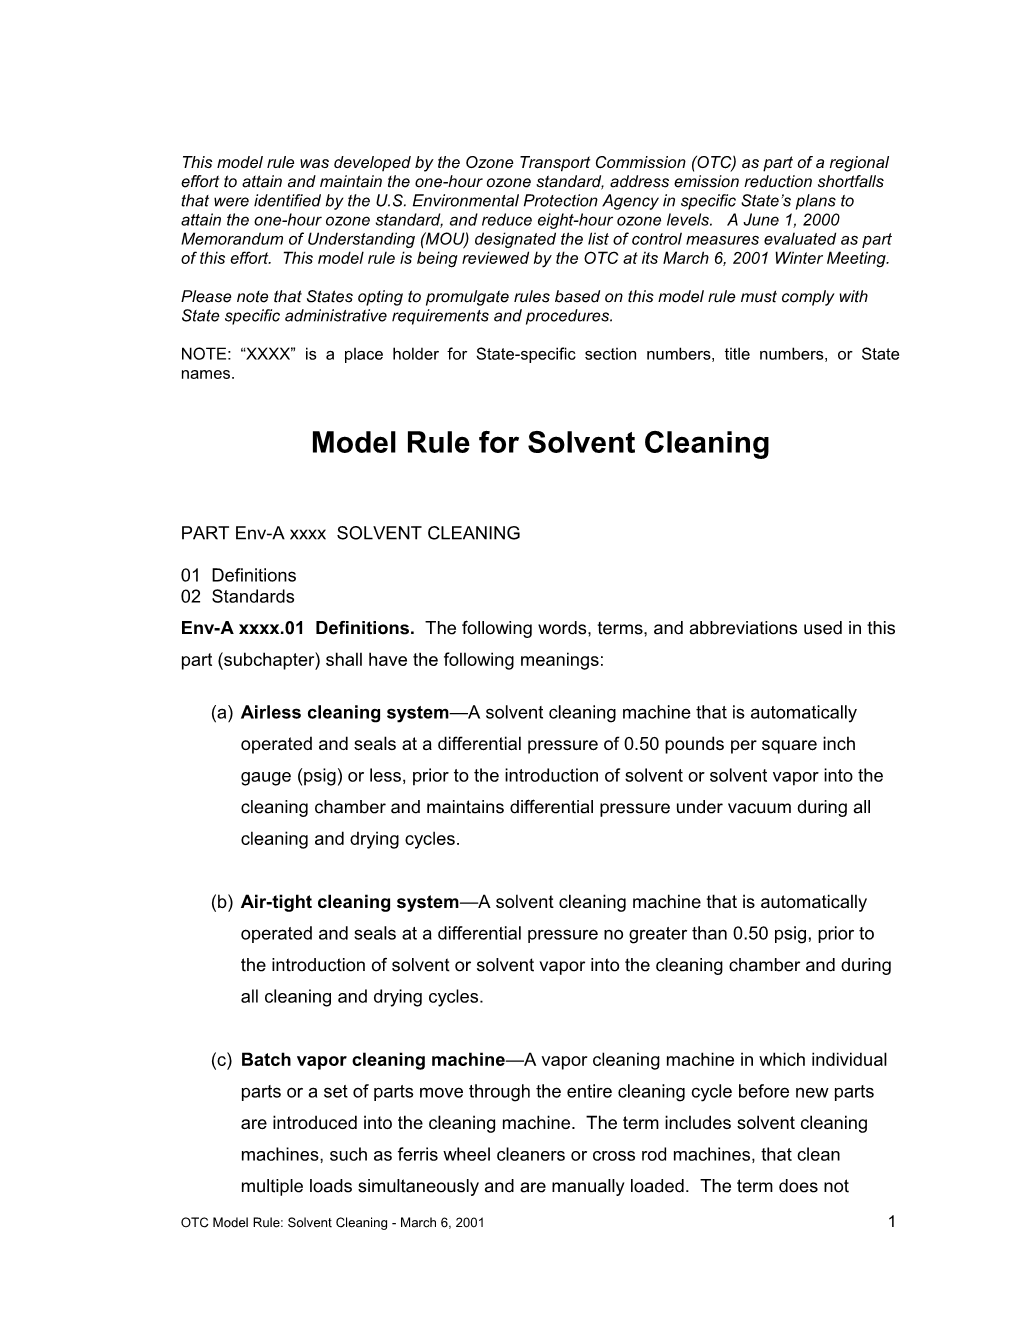 Model Rule for Solvent Cleaning